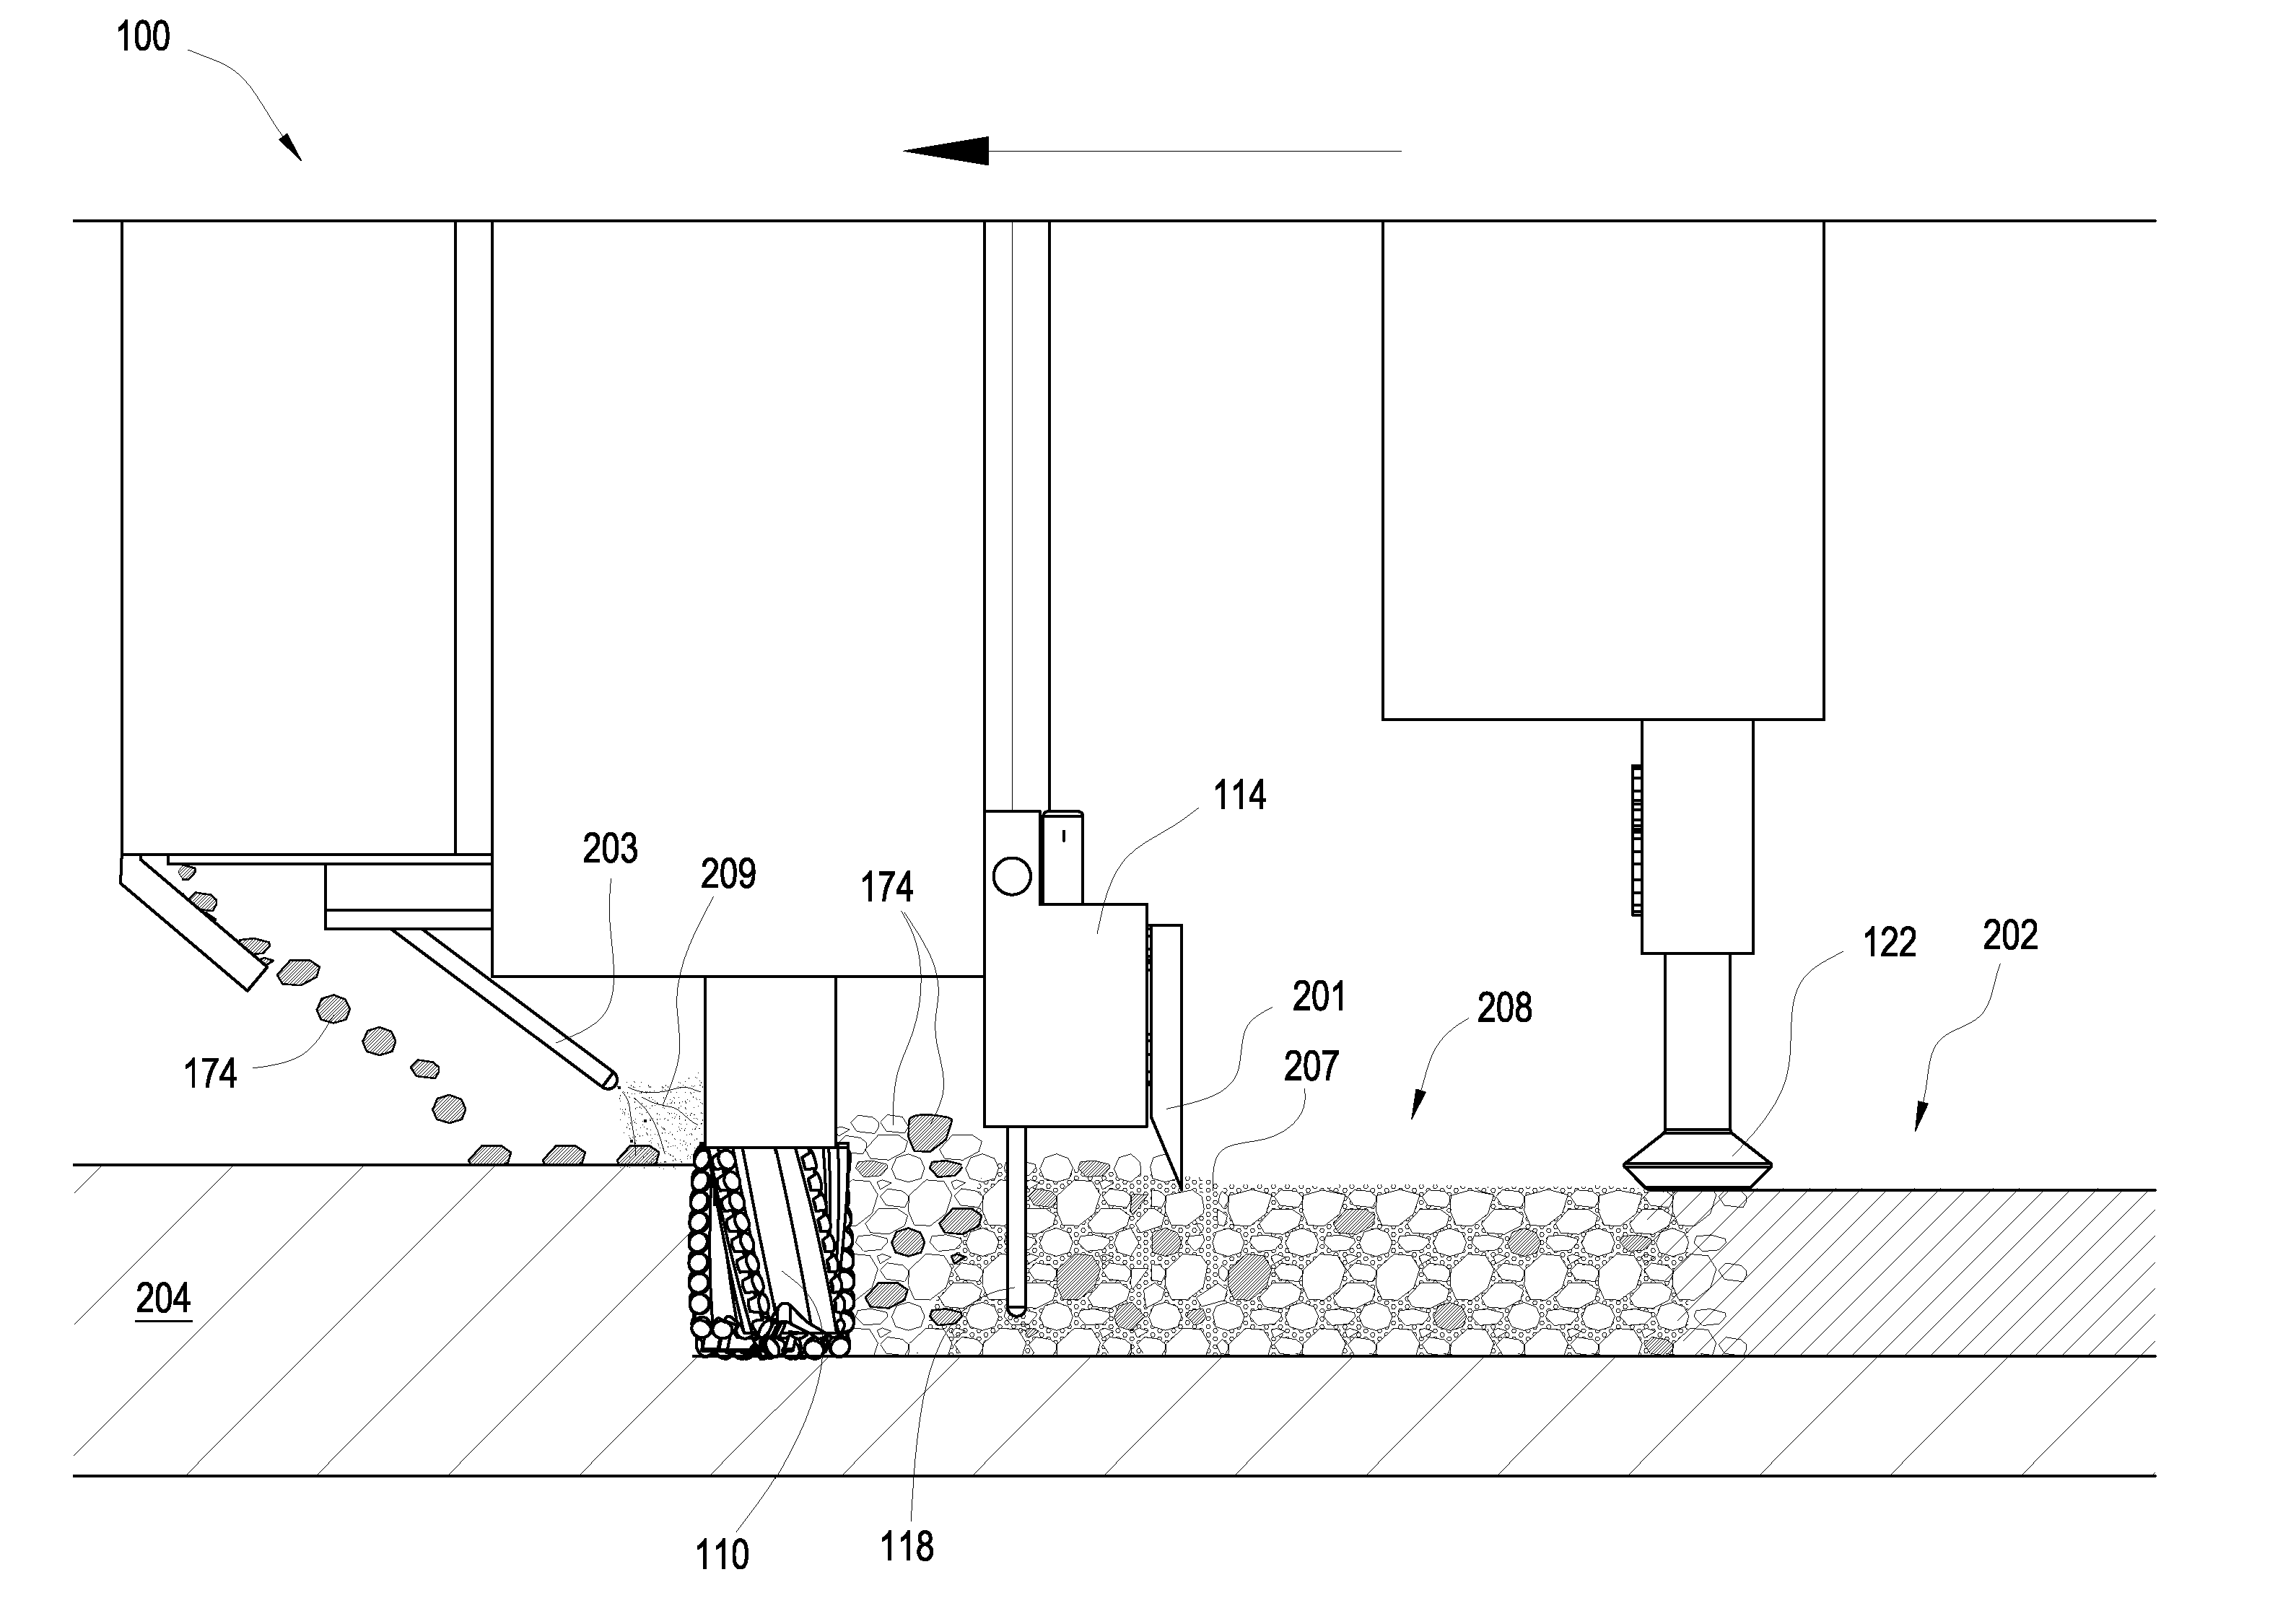 Method for Depositing Pavement Rejuvenation Material into a Layer of Aggregate